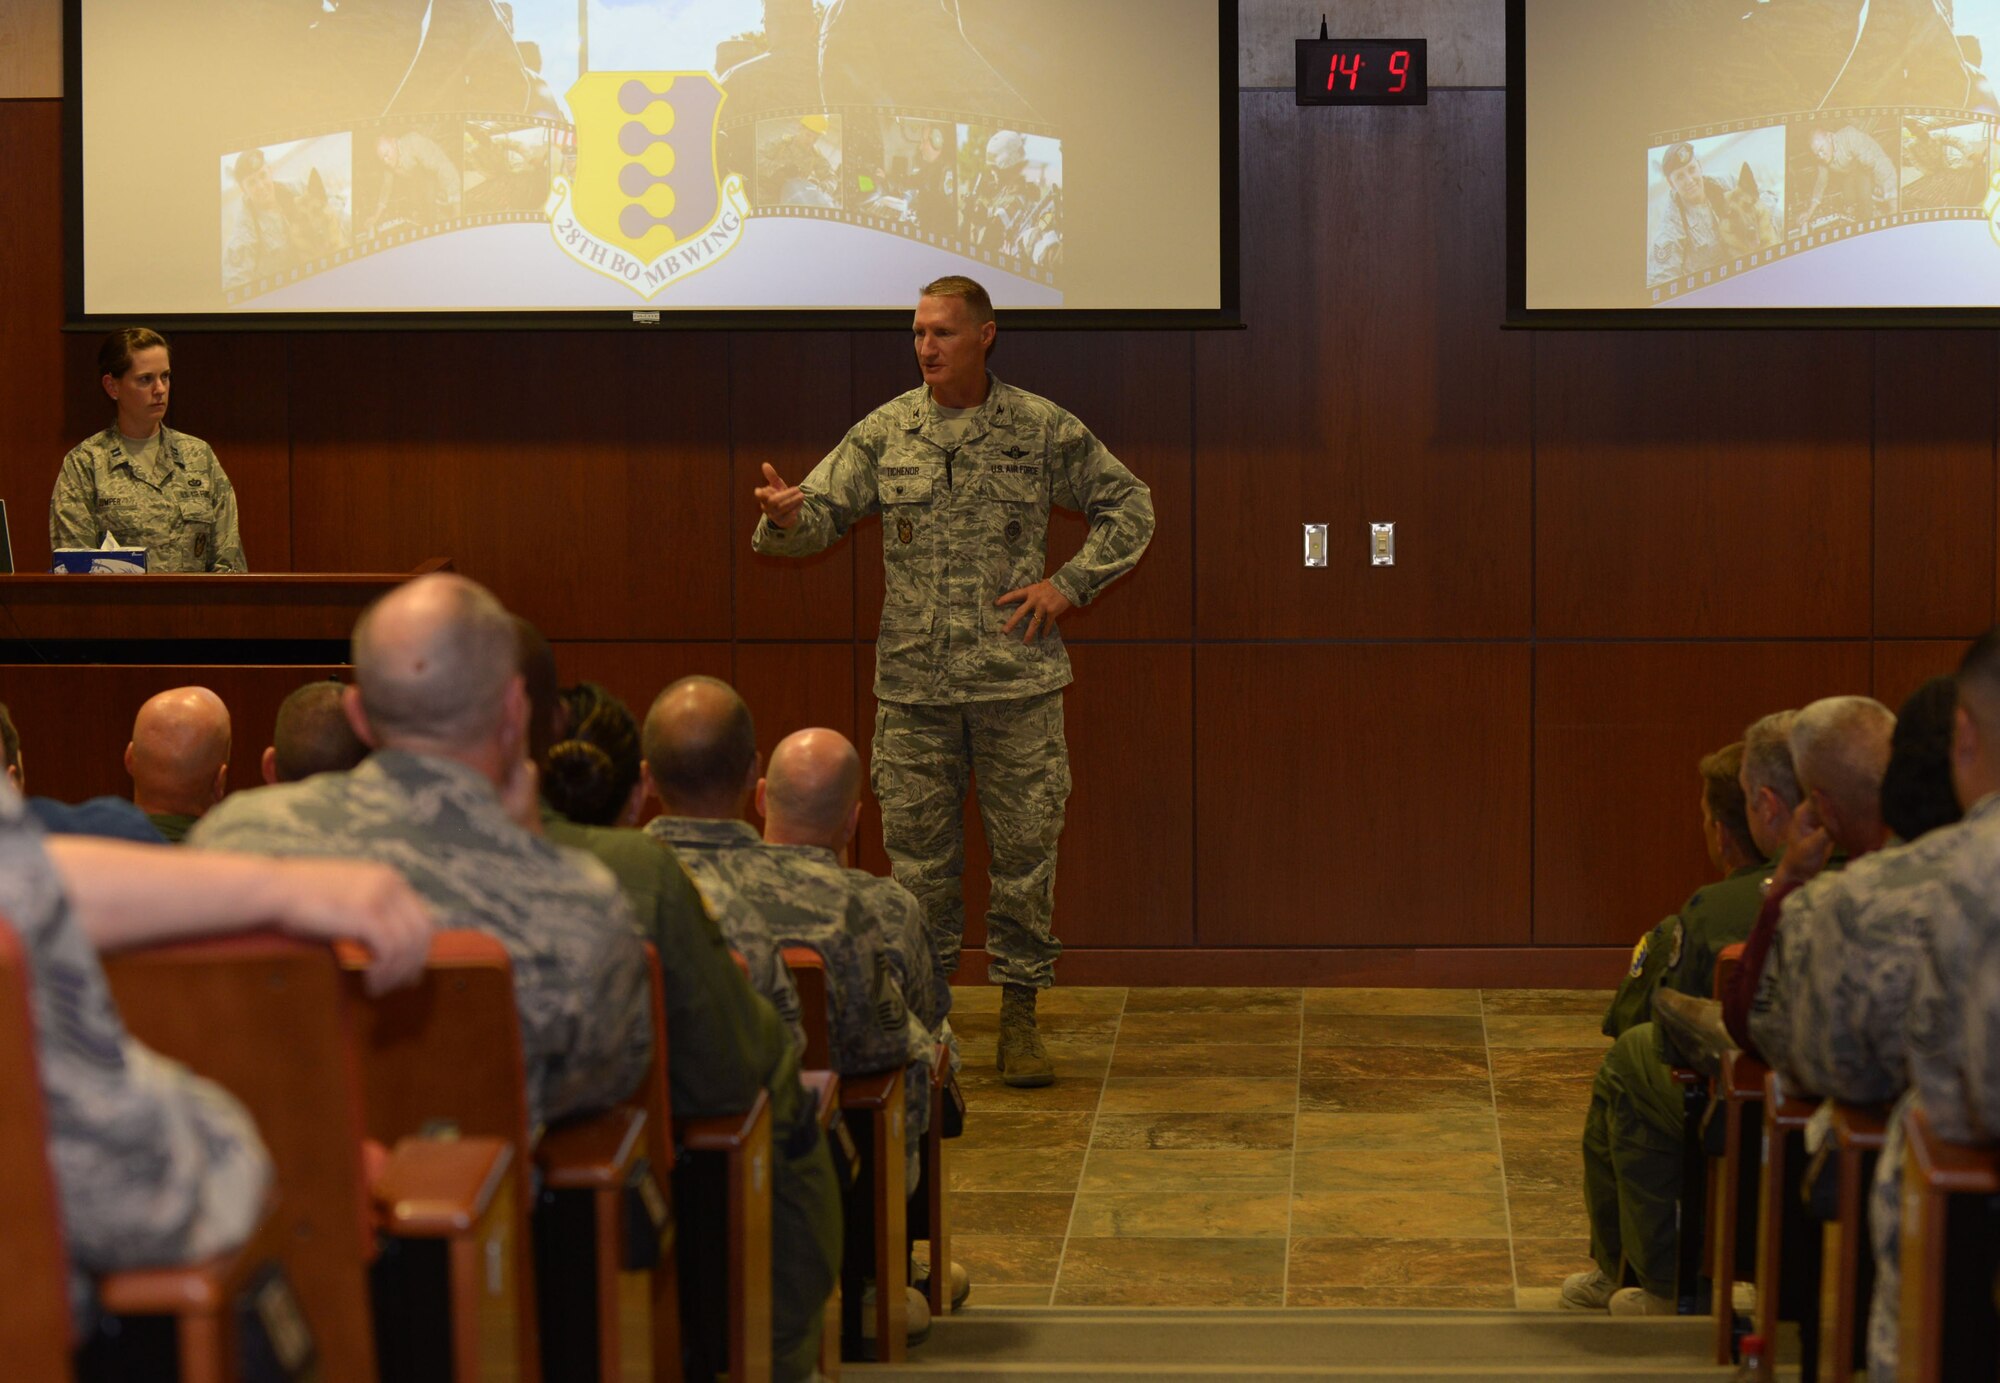 Col. Michael Tichenor, Air Force Global Strike Command inspector general, speaks at the unit mission briefing at Ellsworth Air Force Base, S.D., Aug. 21, 2016. The Unit Effectiveness Inspection consists of three major parts – Airman-to-IG sessions, the main inspection, and feedback, which leads to the unit's final effectiveness rating. (U.S. Air Force photo by Airman 1st Class Donald C. Knechtel/Released)